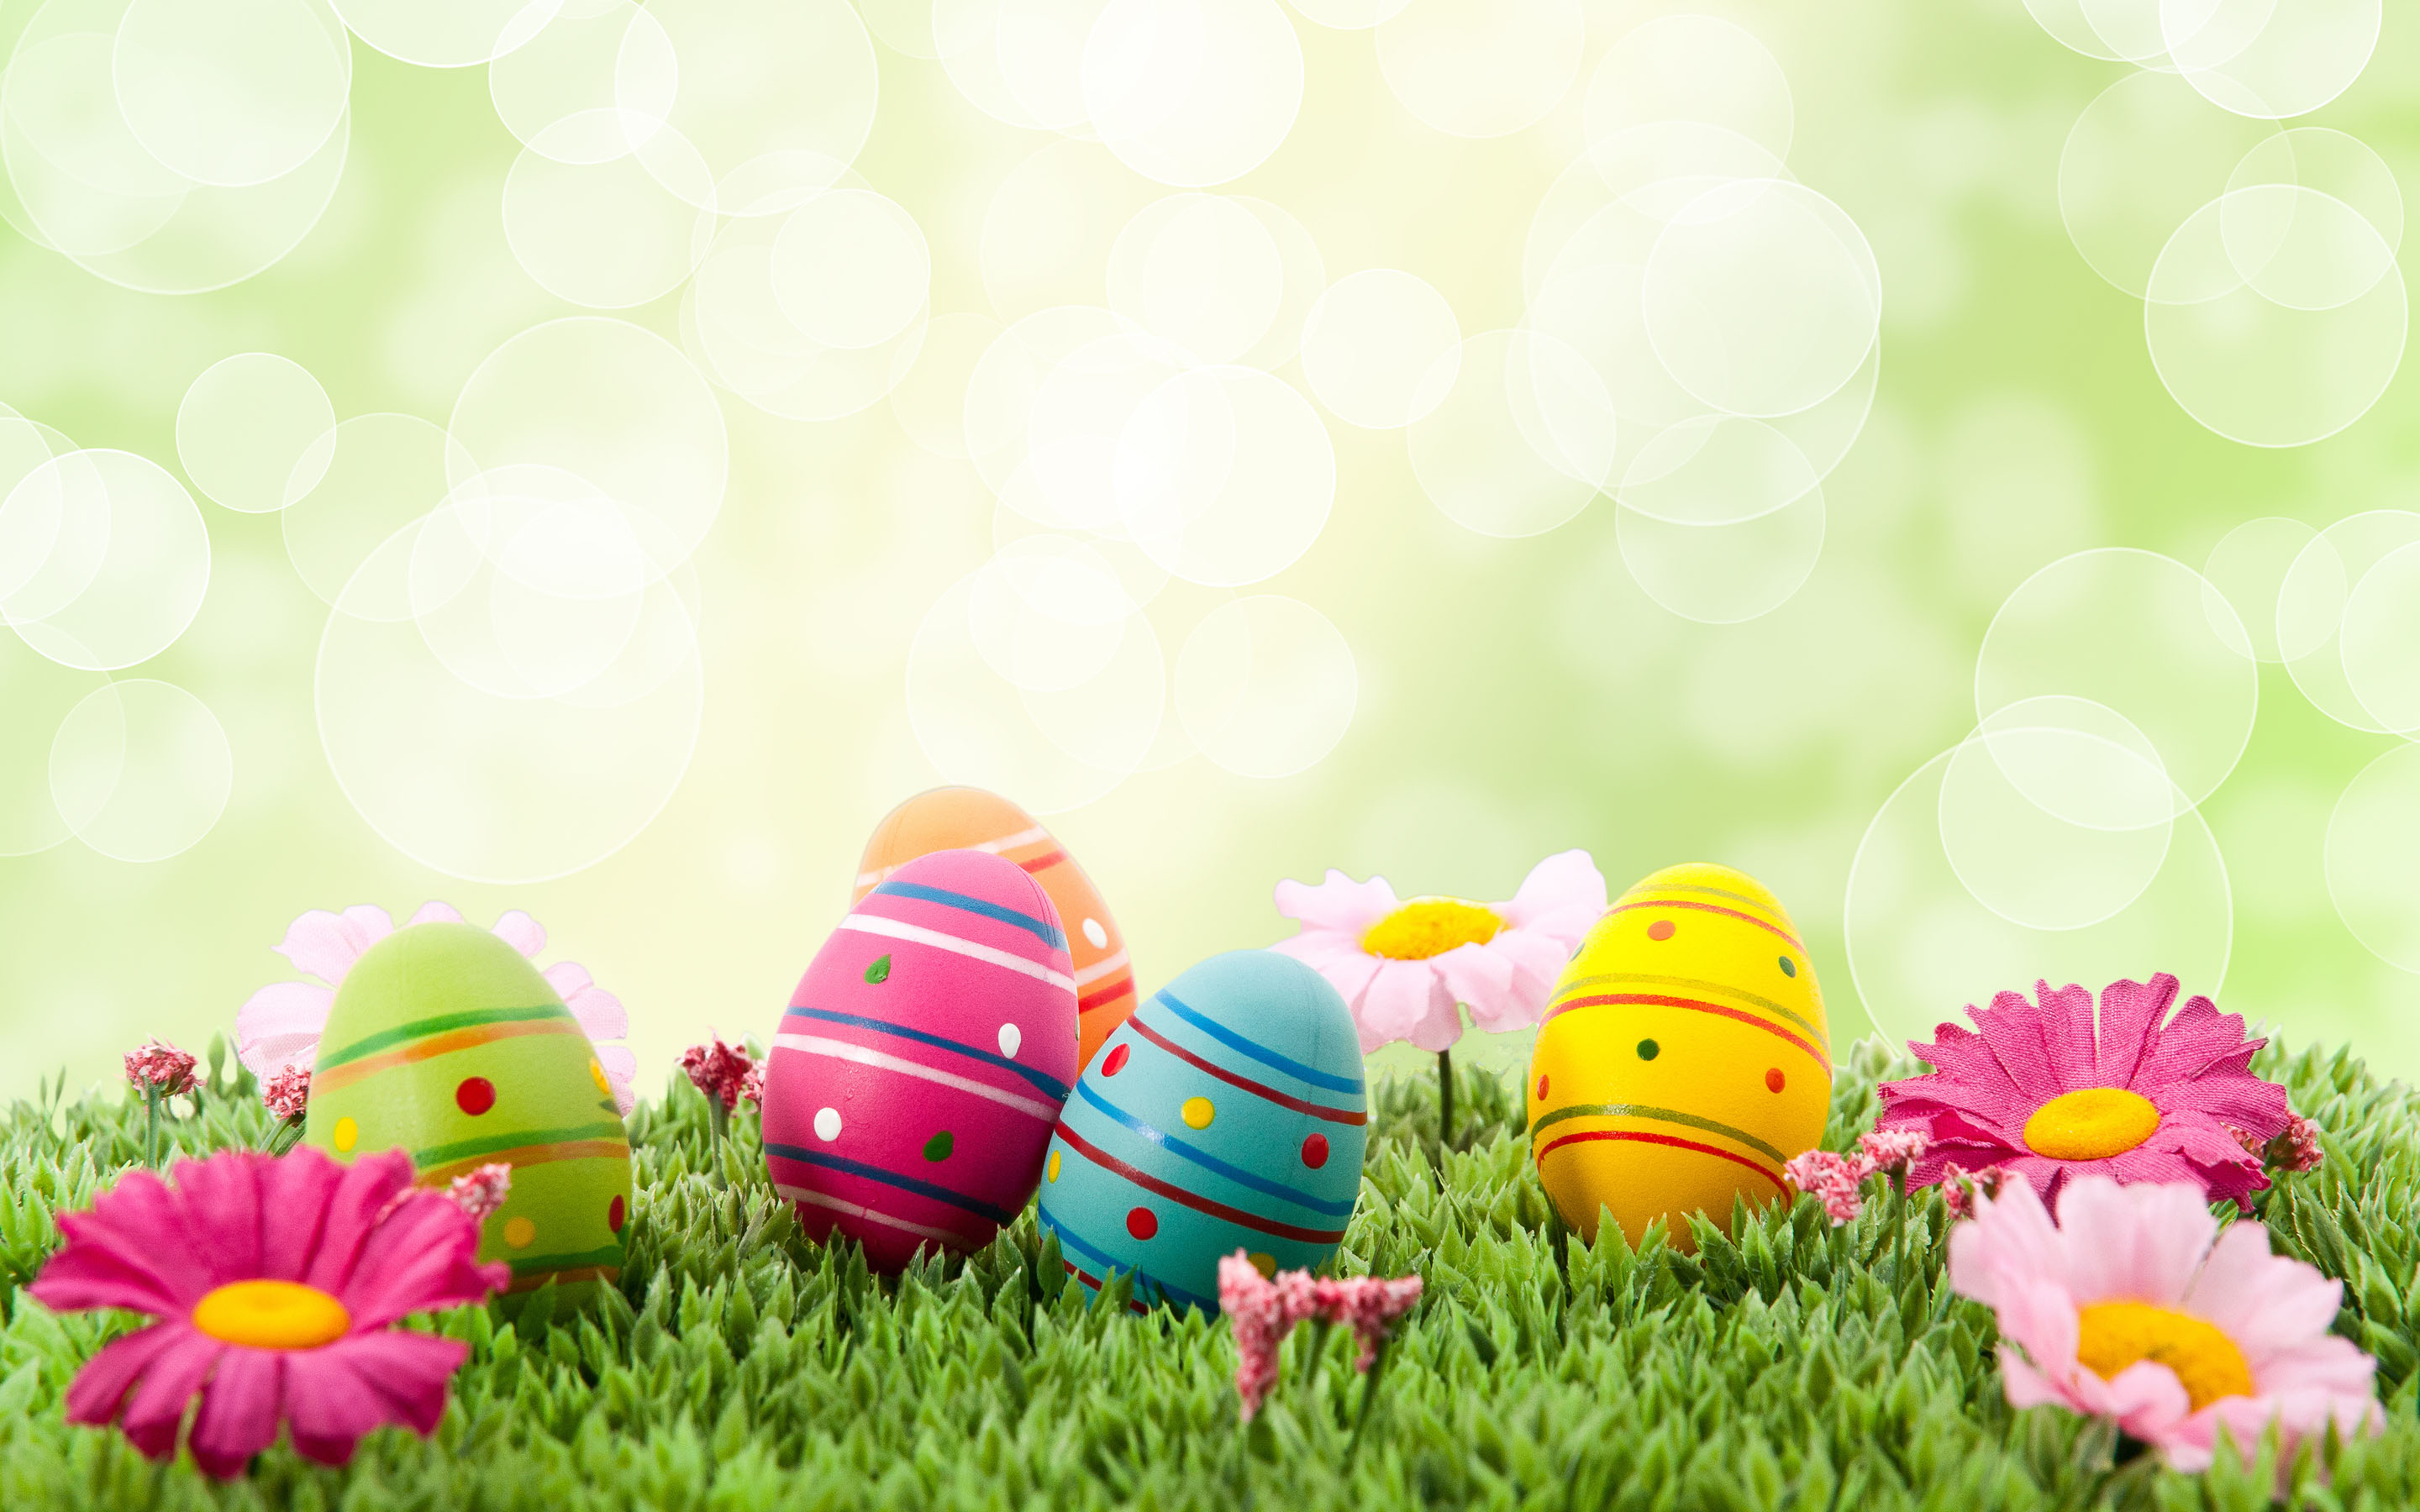 Easter 2021 HD Wallpaper Quote Wishes Images